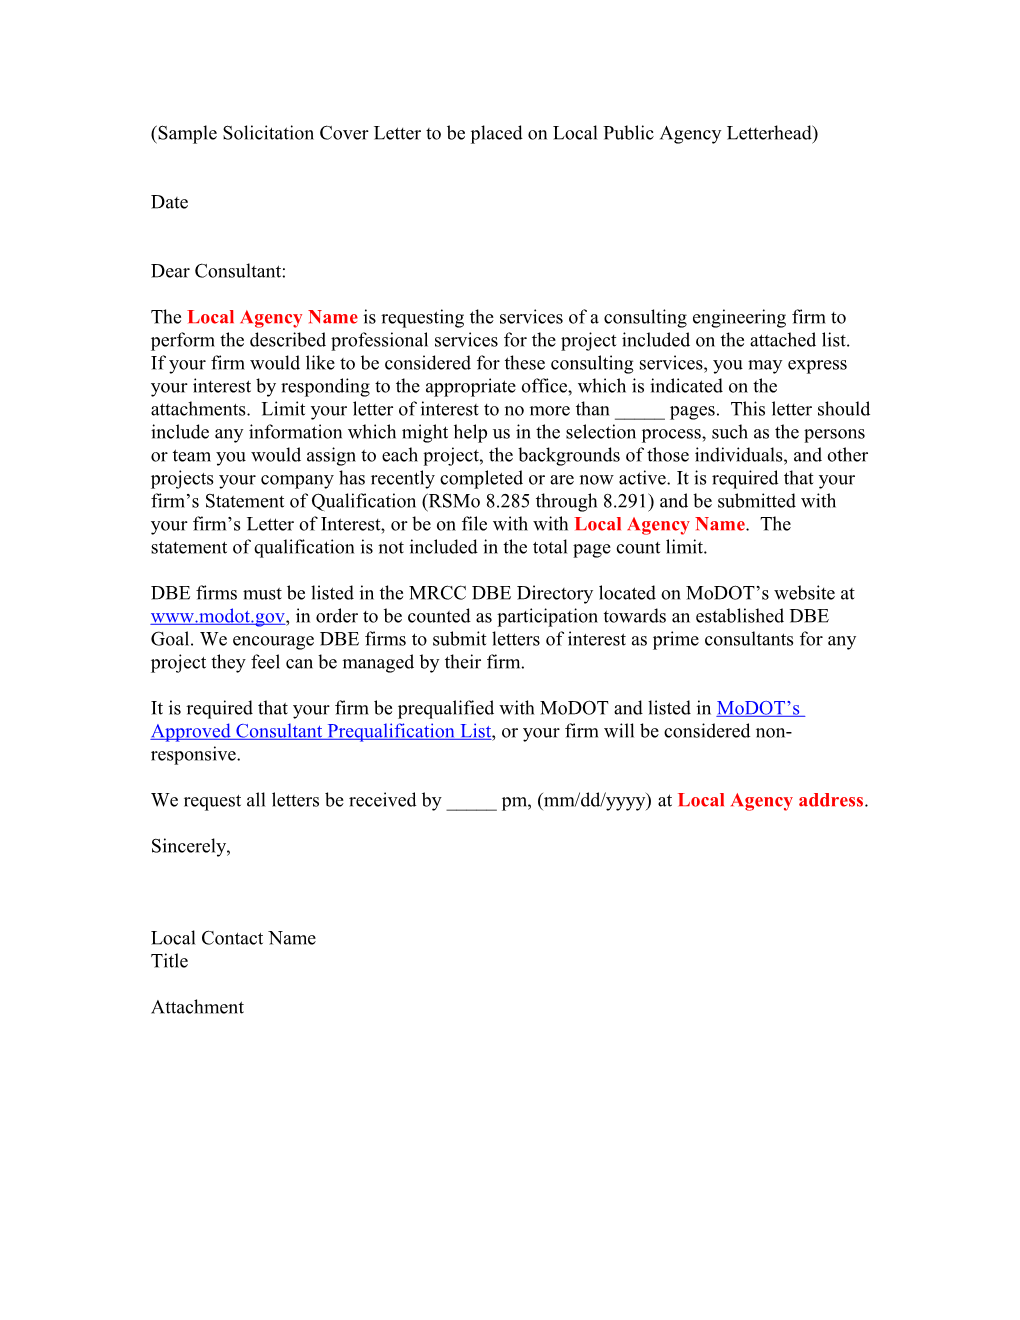 Sample Solicitation Cover Letter to Be Placed on Local Public Agency Letterhead